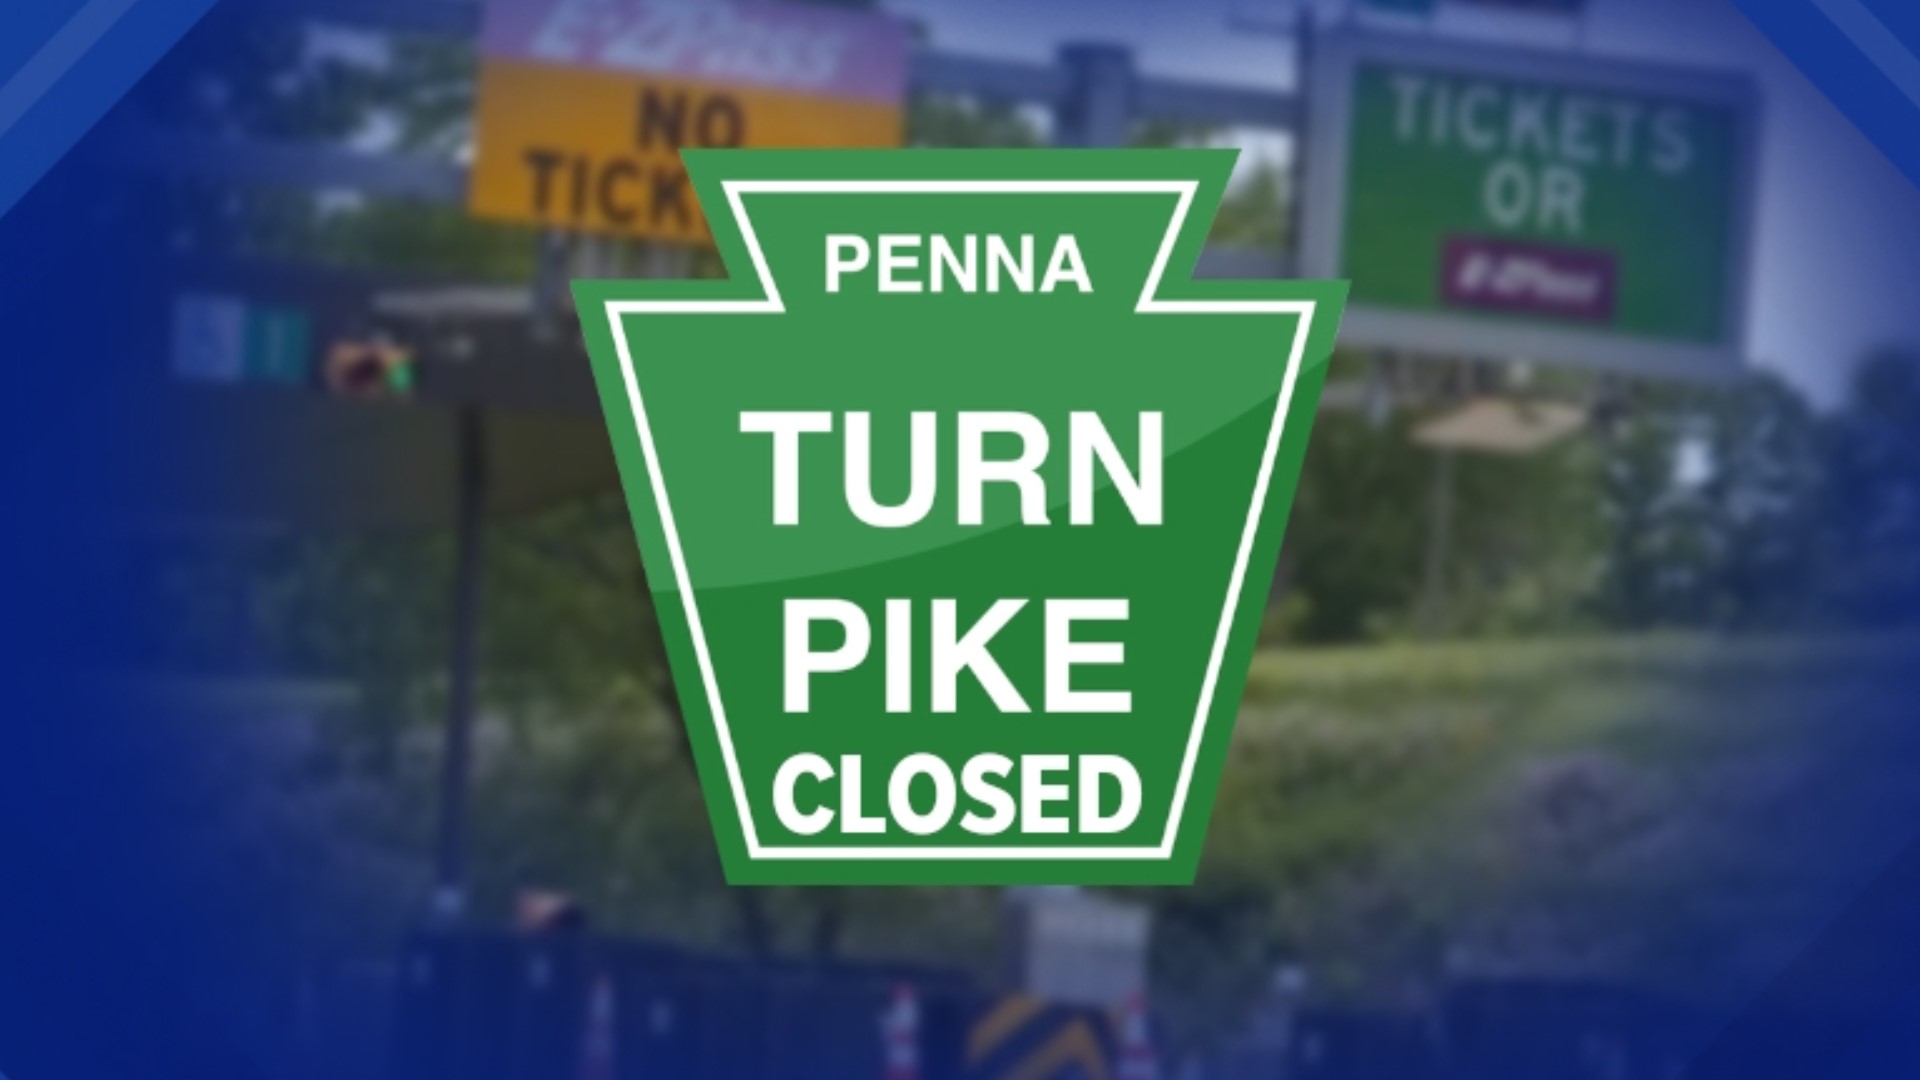 Weather permitting, portions of the Pennsylvania Turnpike are expected to be closed at times throughout the weekend.